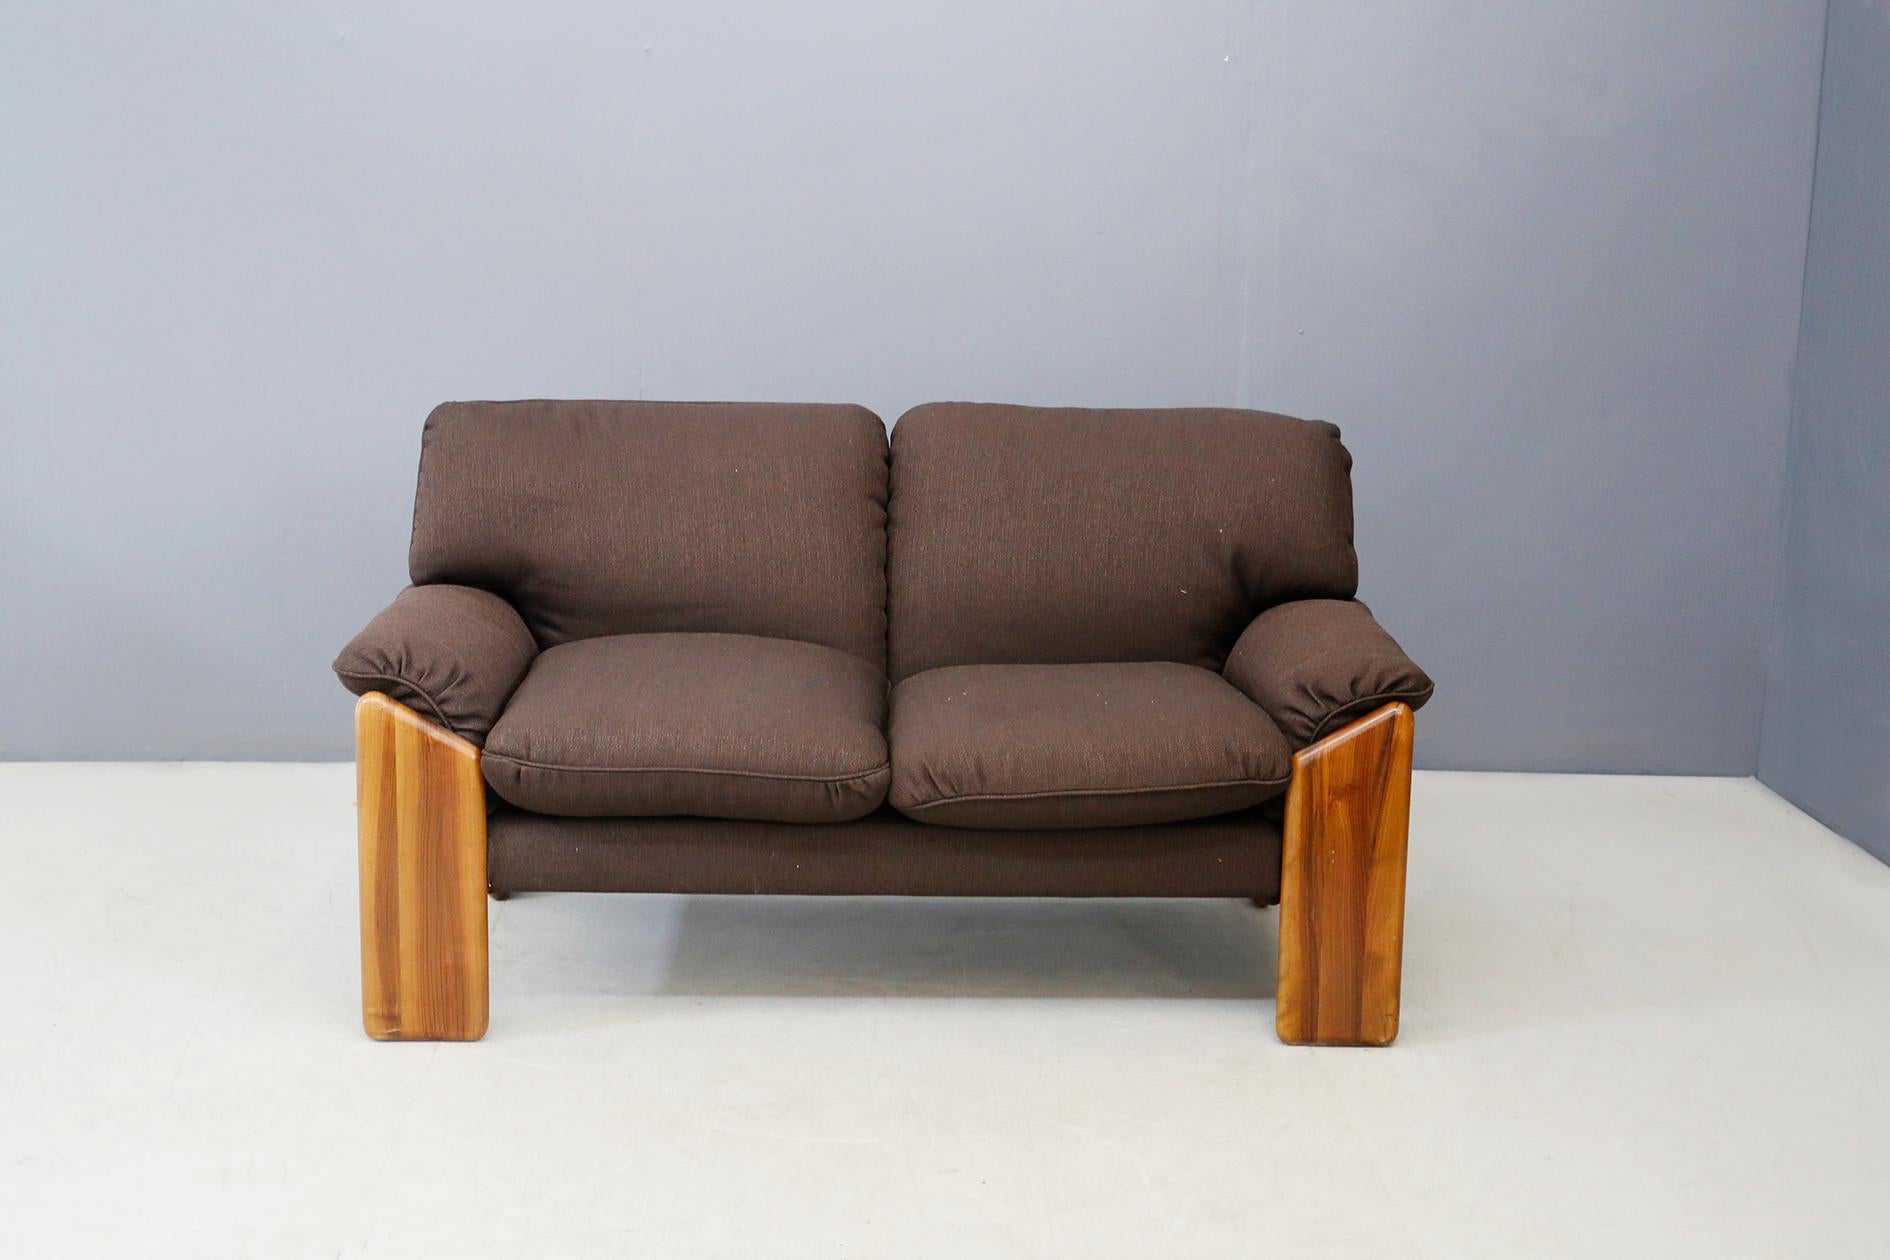 Two-seat sofa by Sapporo for Mobil Girgi from 1970. The sofa is made of noble woods with excellent finishes. The particularity of the sofa is its very geometric line, it looks like an interlocking of triangles designed to create a perfect harmony.